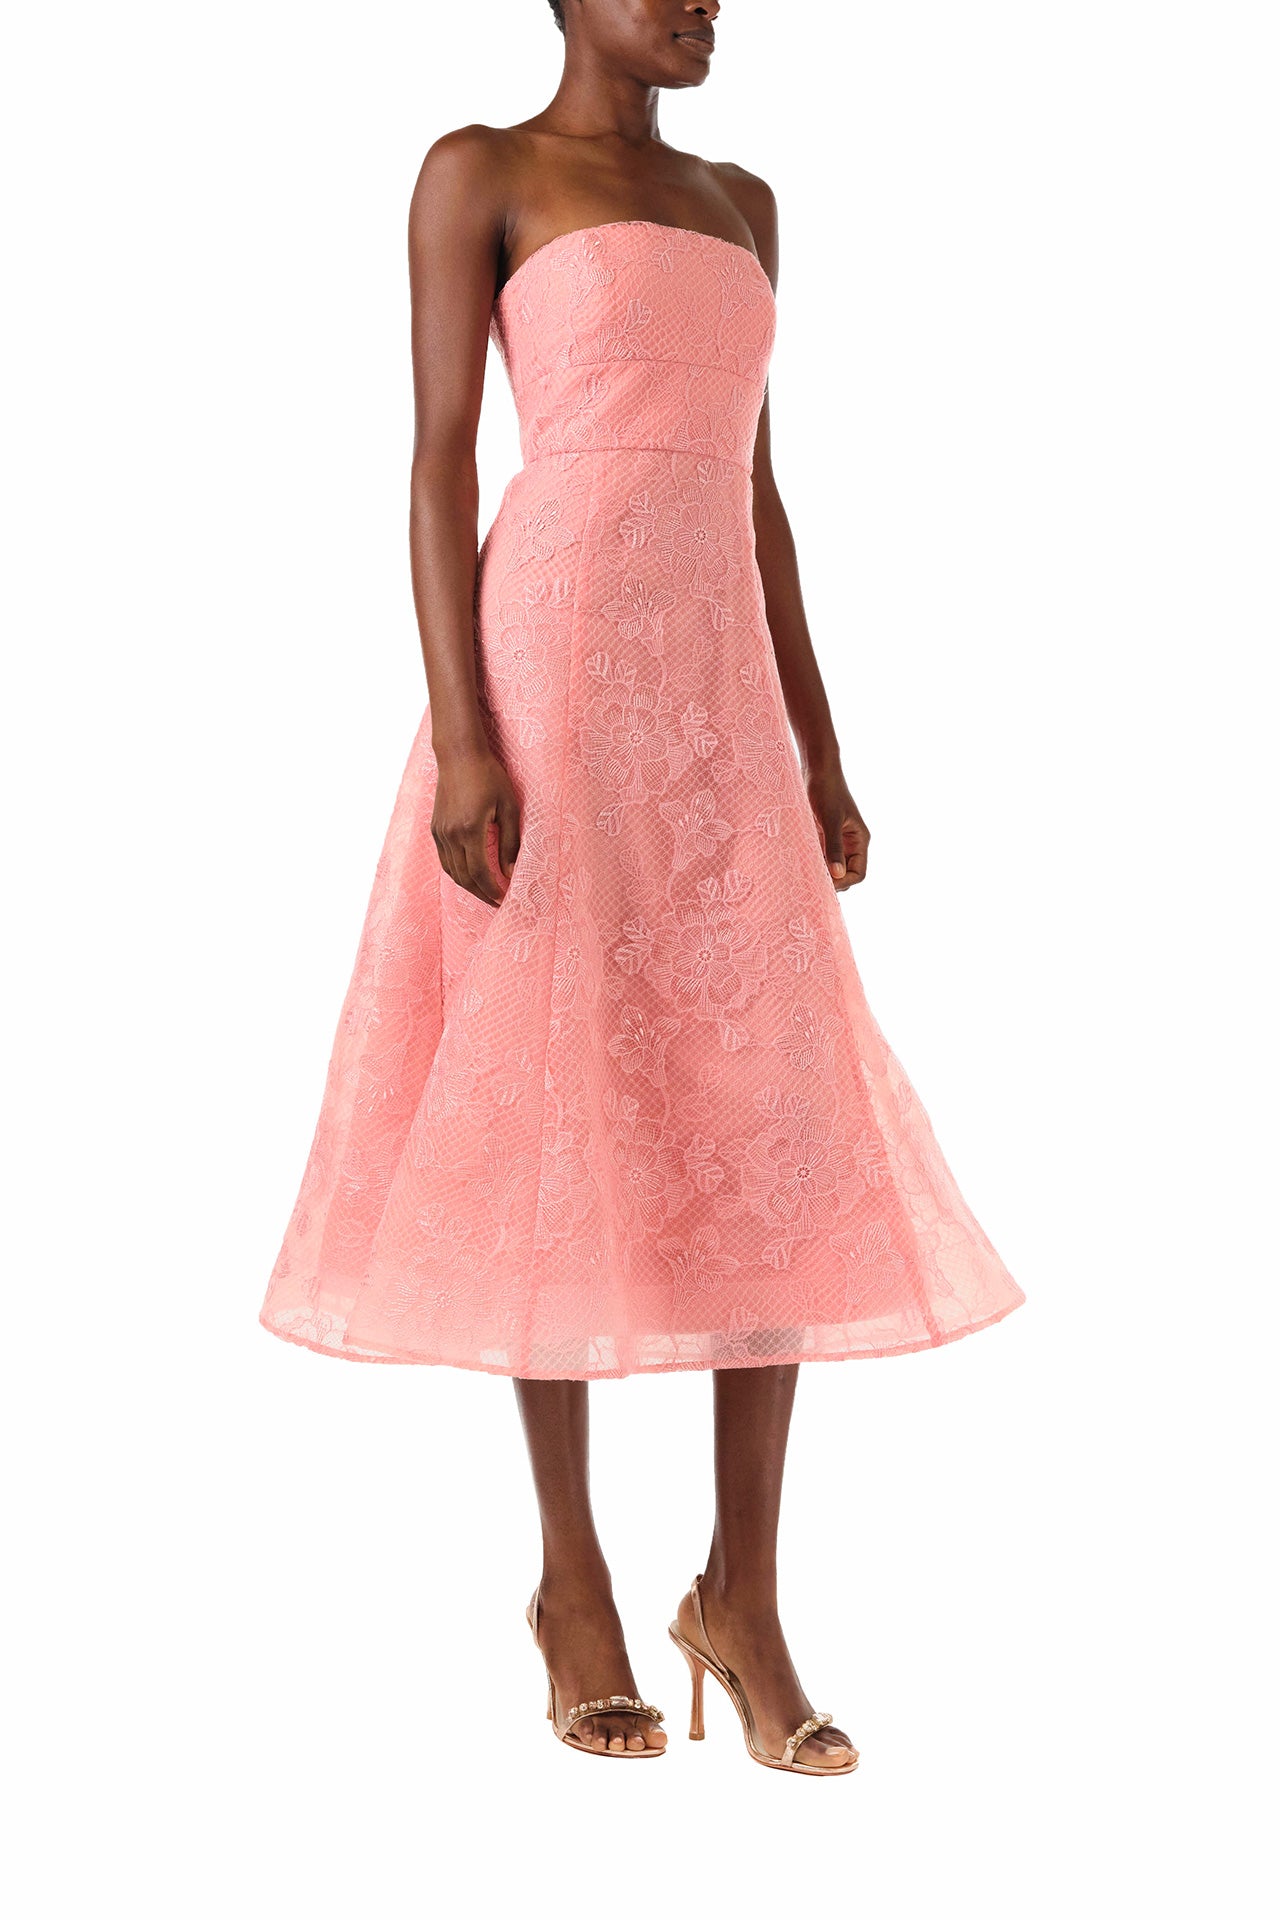 ML Monique Lhuillier 2024 strapless midi dress with flared skirt in Coral Rose embroidered lace - right side.